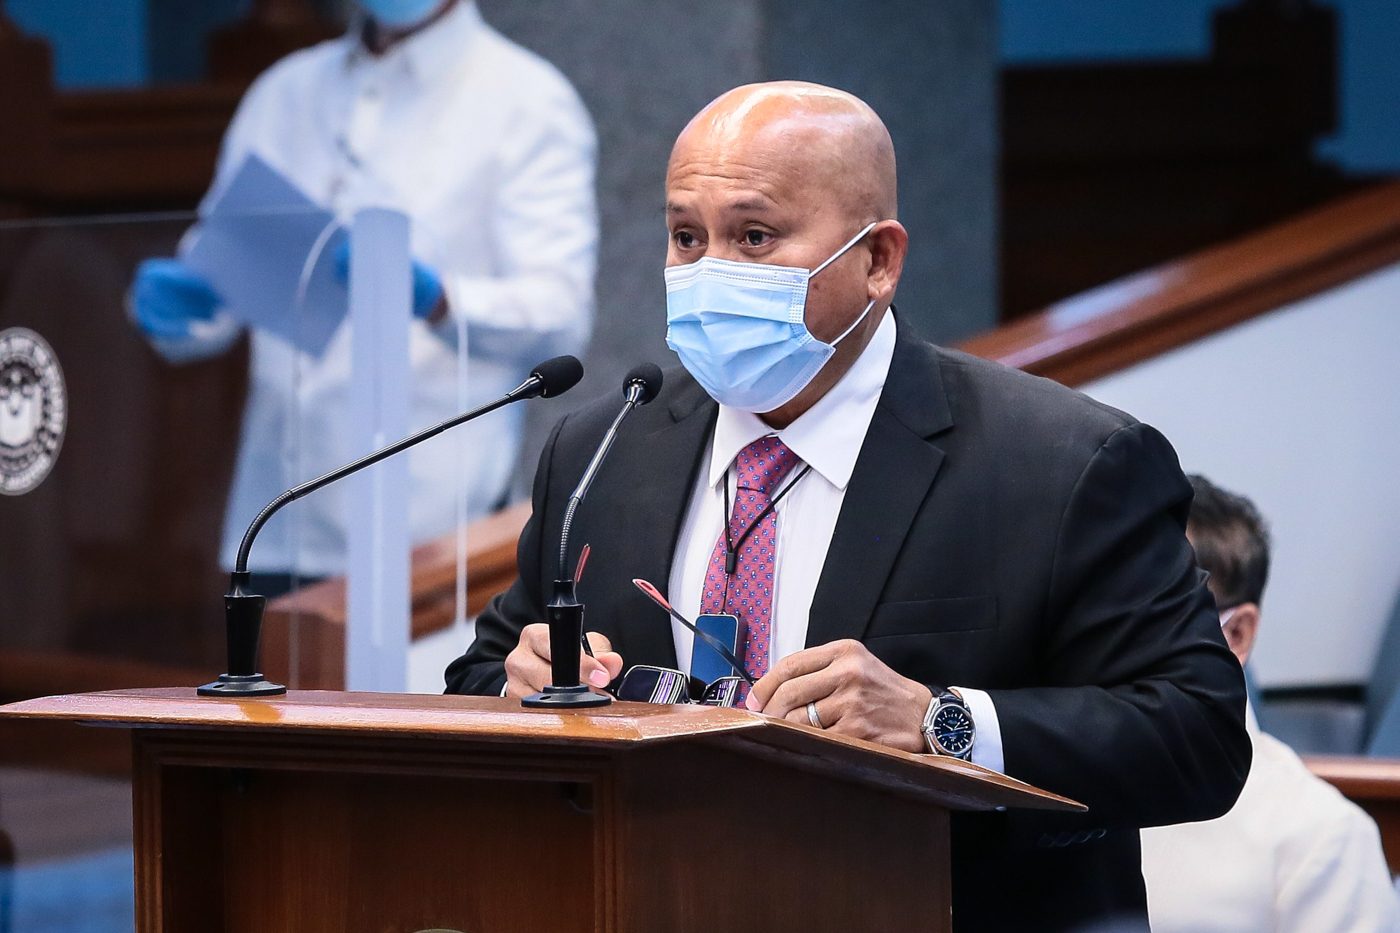 Bato pushes for death penalty, gets justice panel seat